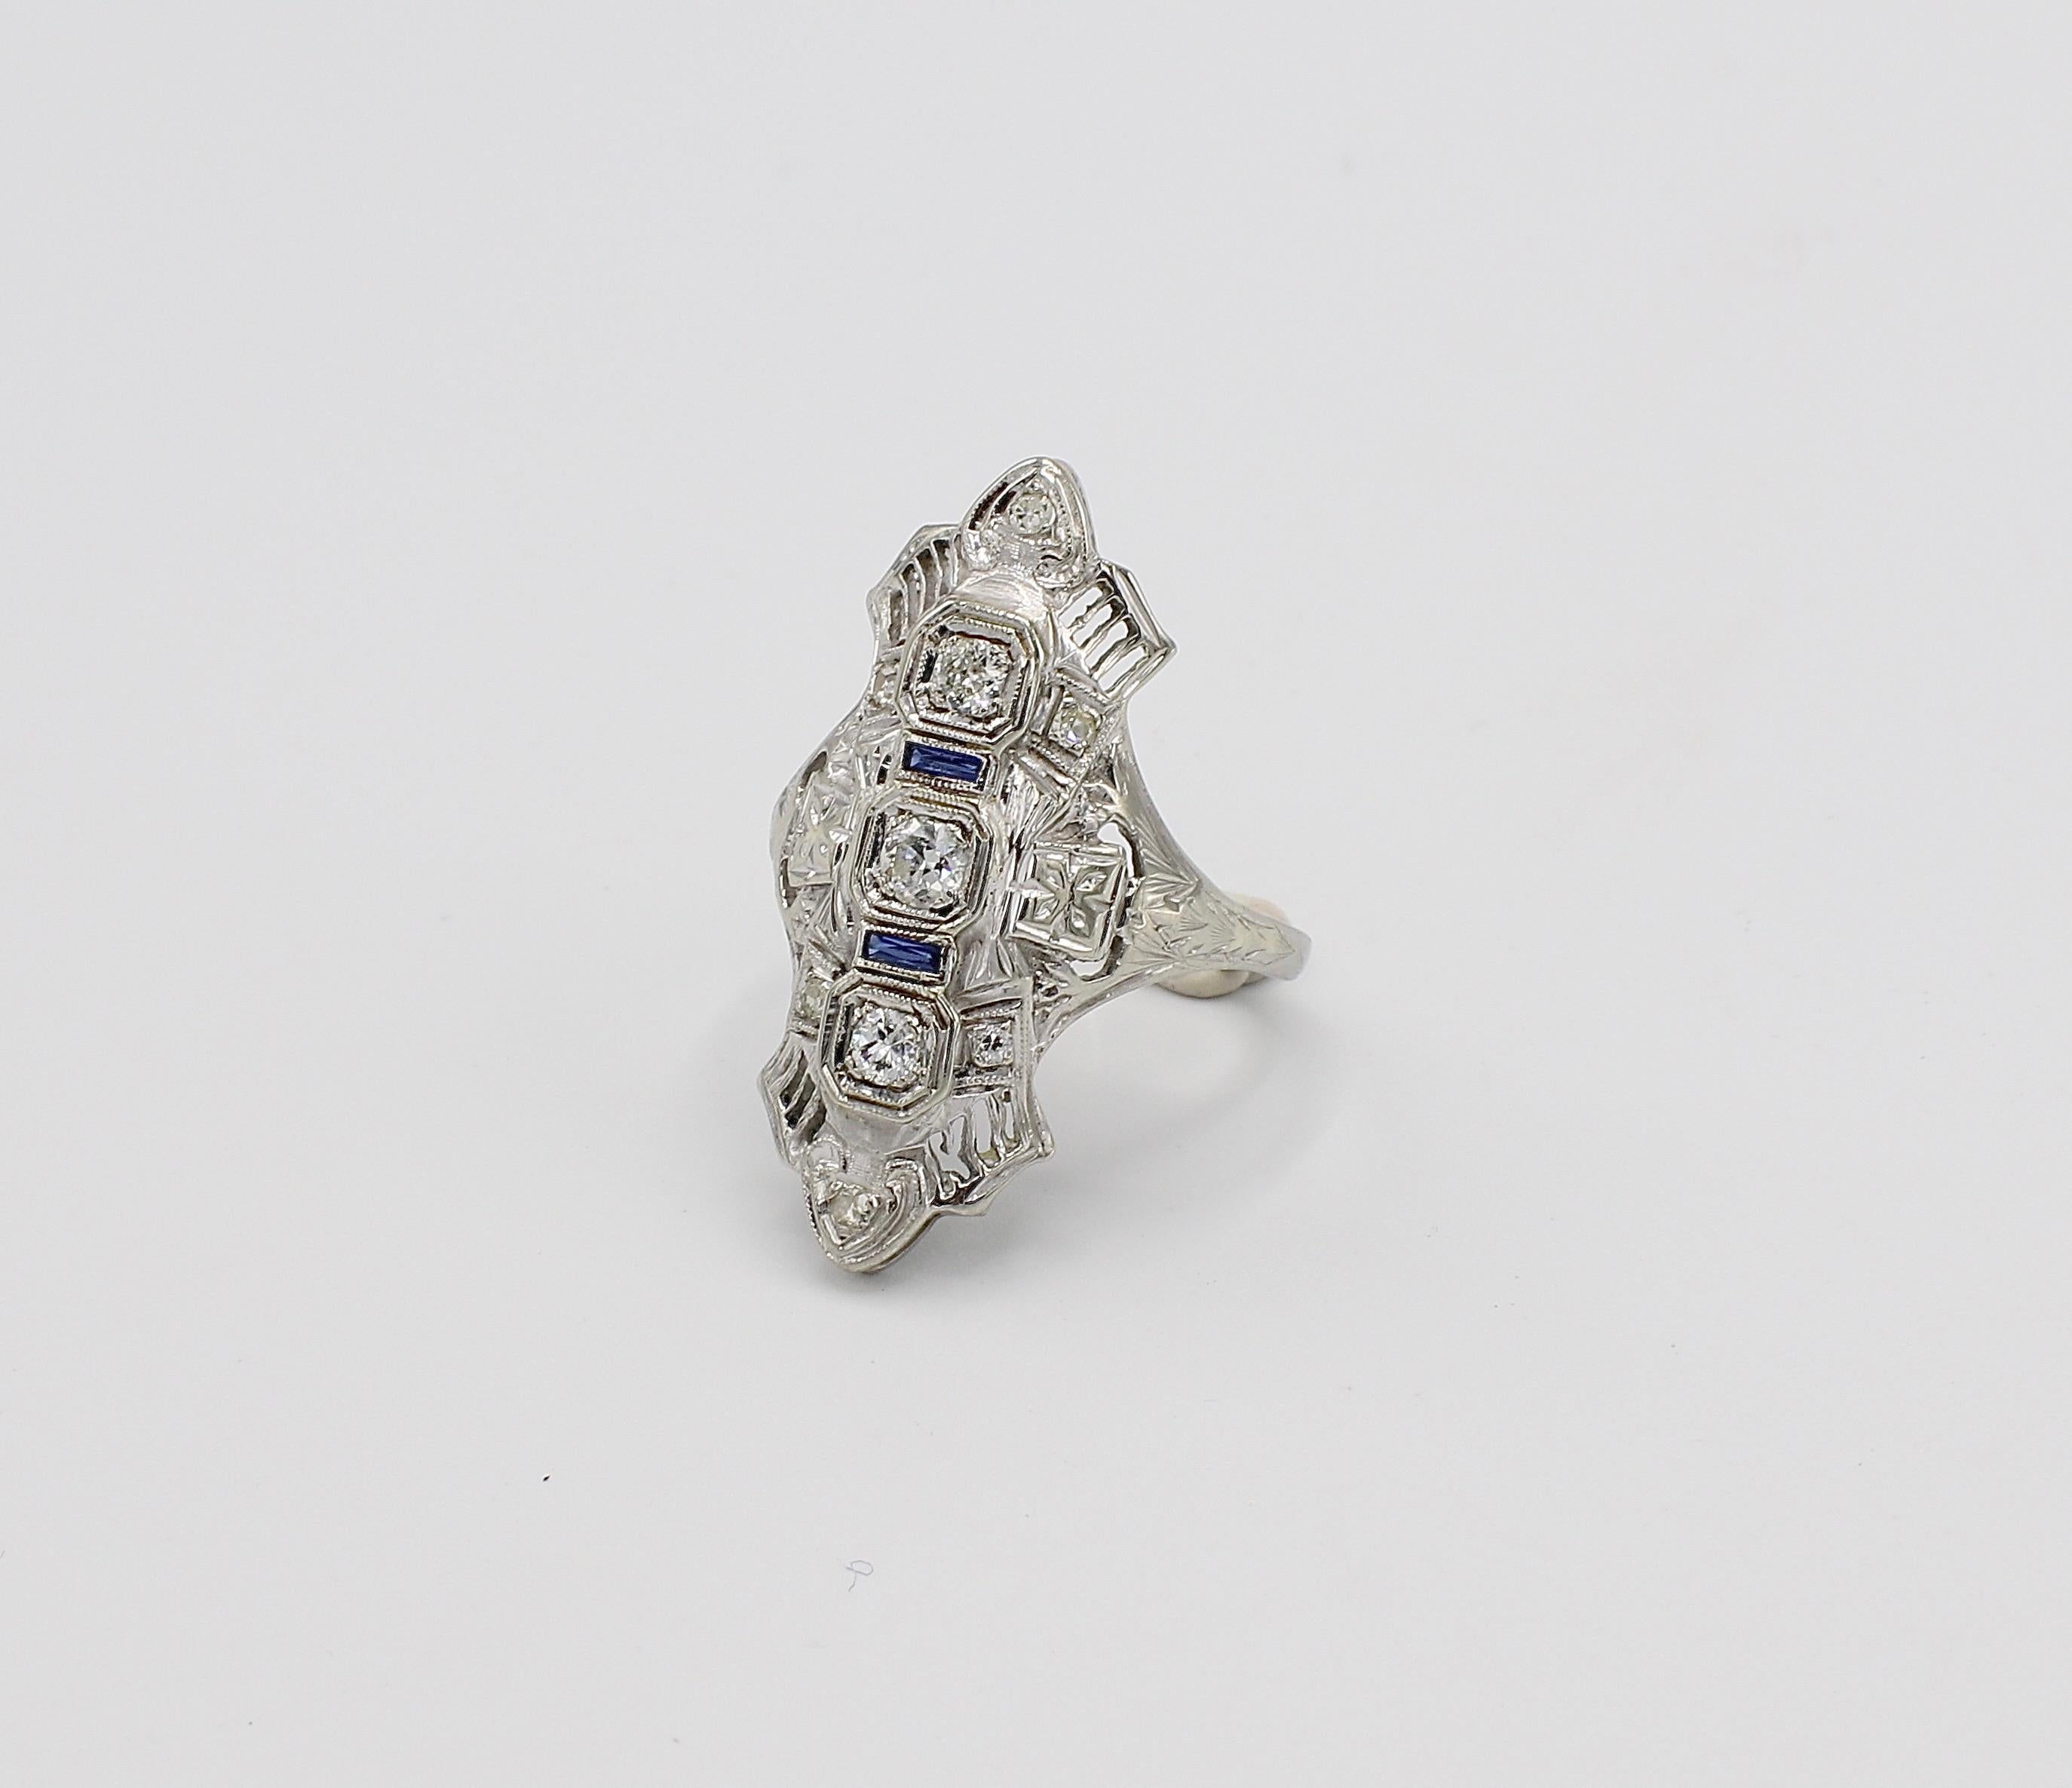 Antique 18K White Gold Natural Diamond & Sapphire Navette Cocktail Ring Size 5.5
Metal: 18k white gold
Weight: 4.5 grams
Diamonds: Approx. .30 CTW round natural diamonds G VS 
Size: 5.5 (US)
Top of ring measures 28mm x 15mm

